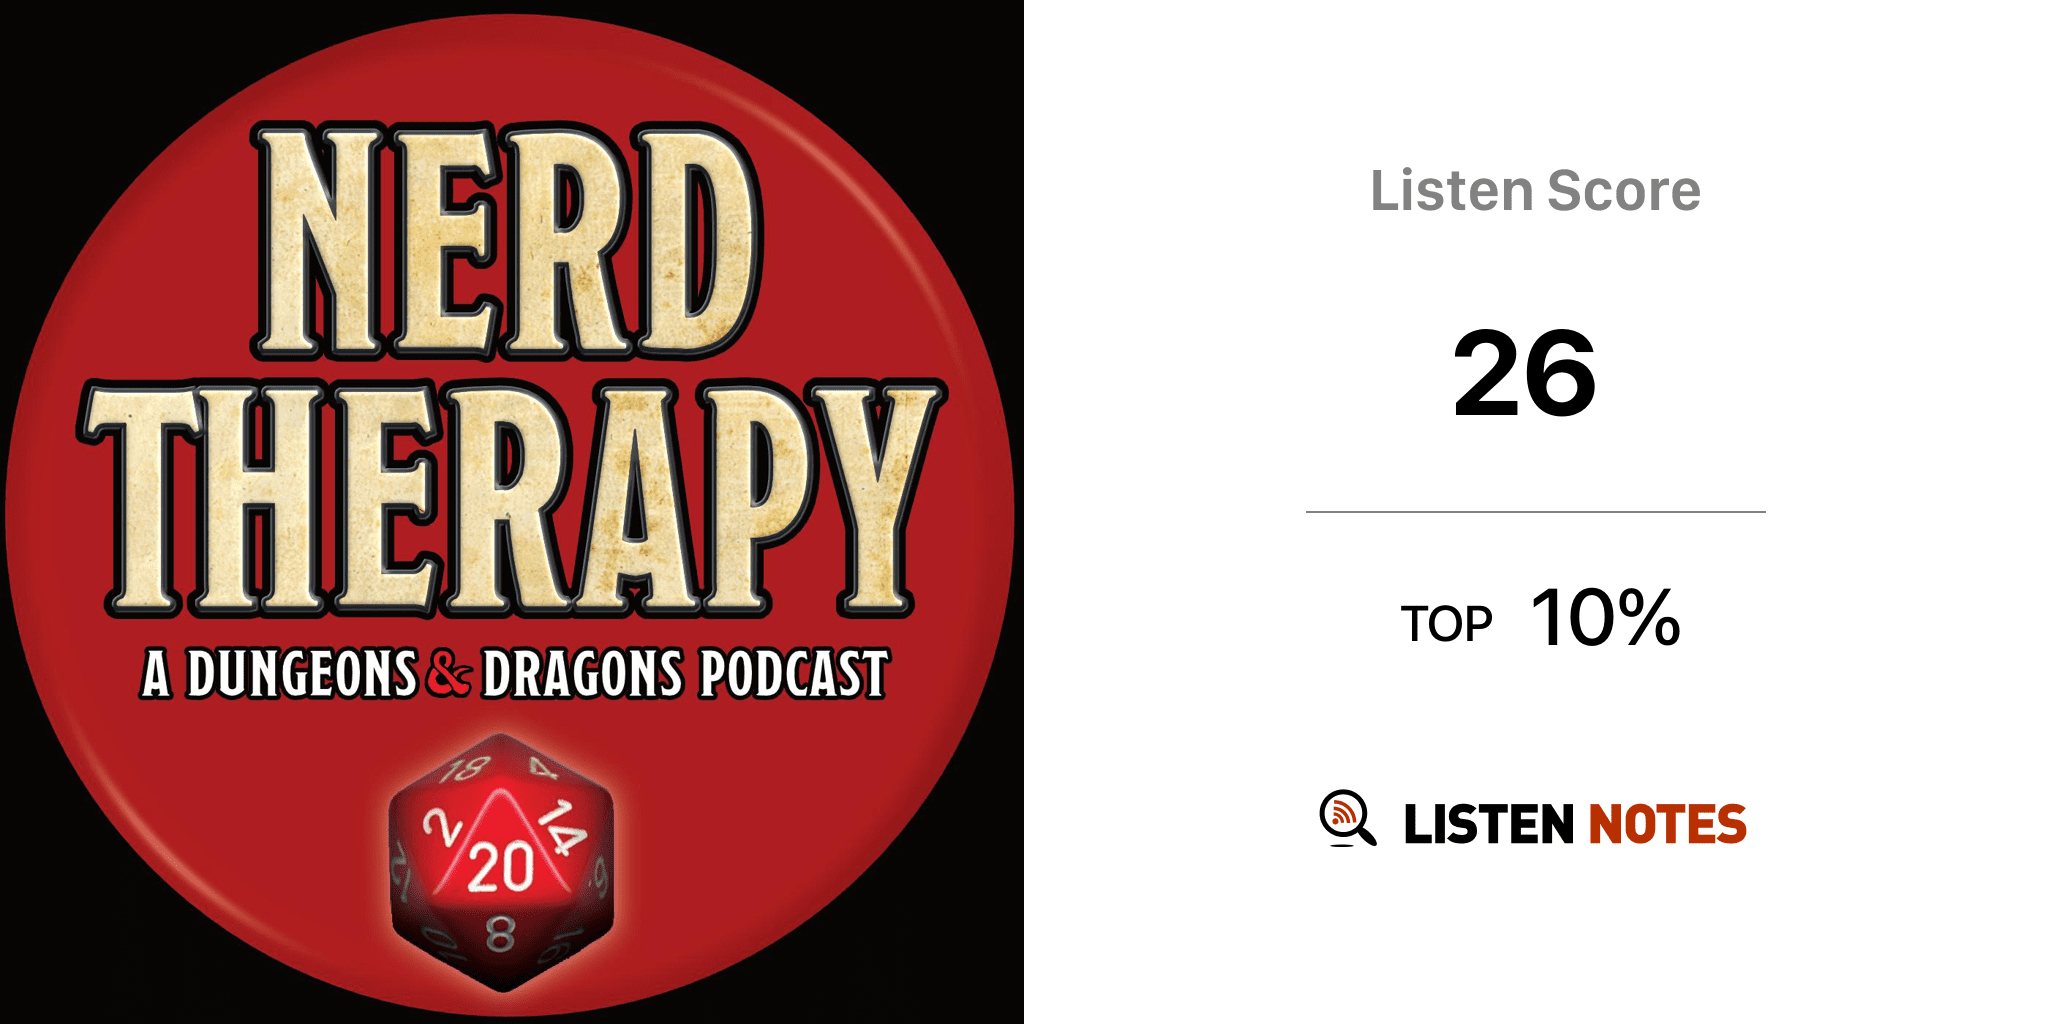 DVM Nerd Therapy Podcast